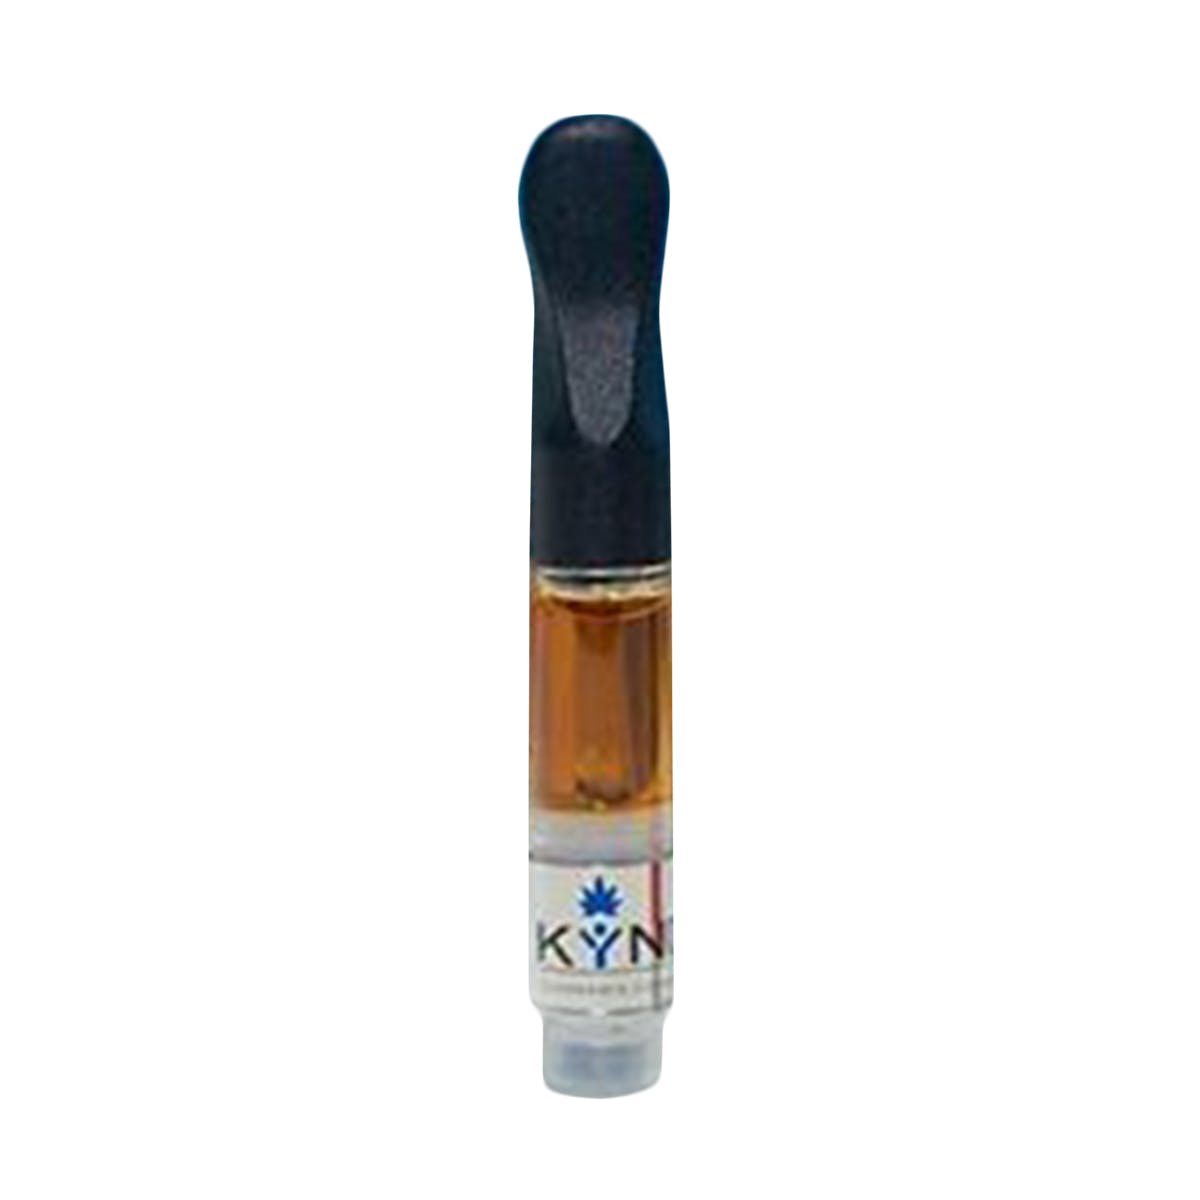 concentrate-kynd-cannabis-chemdawg-550mg-vape-pen-cartridge